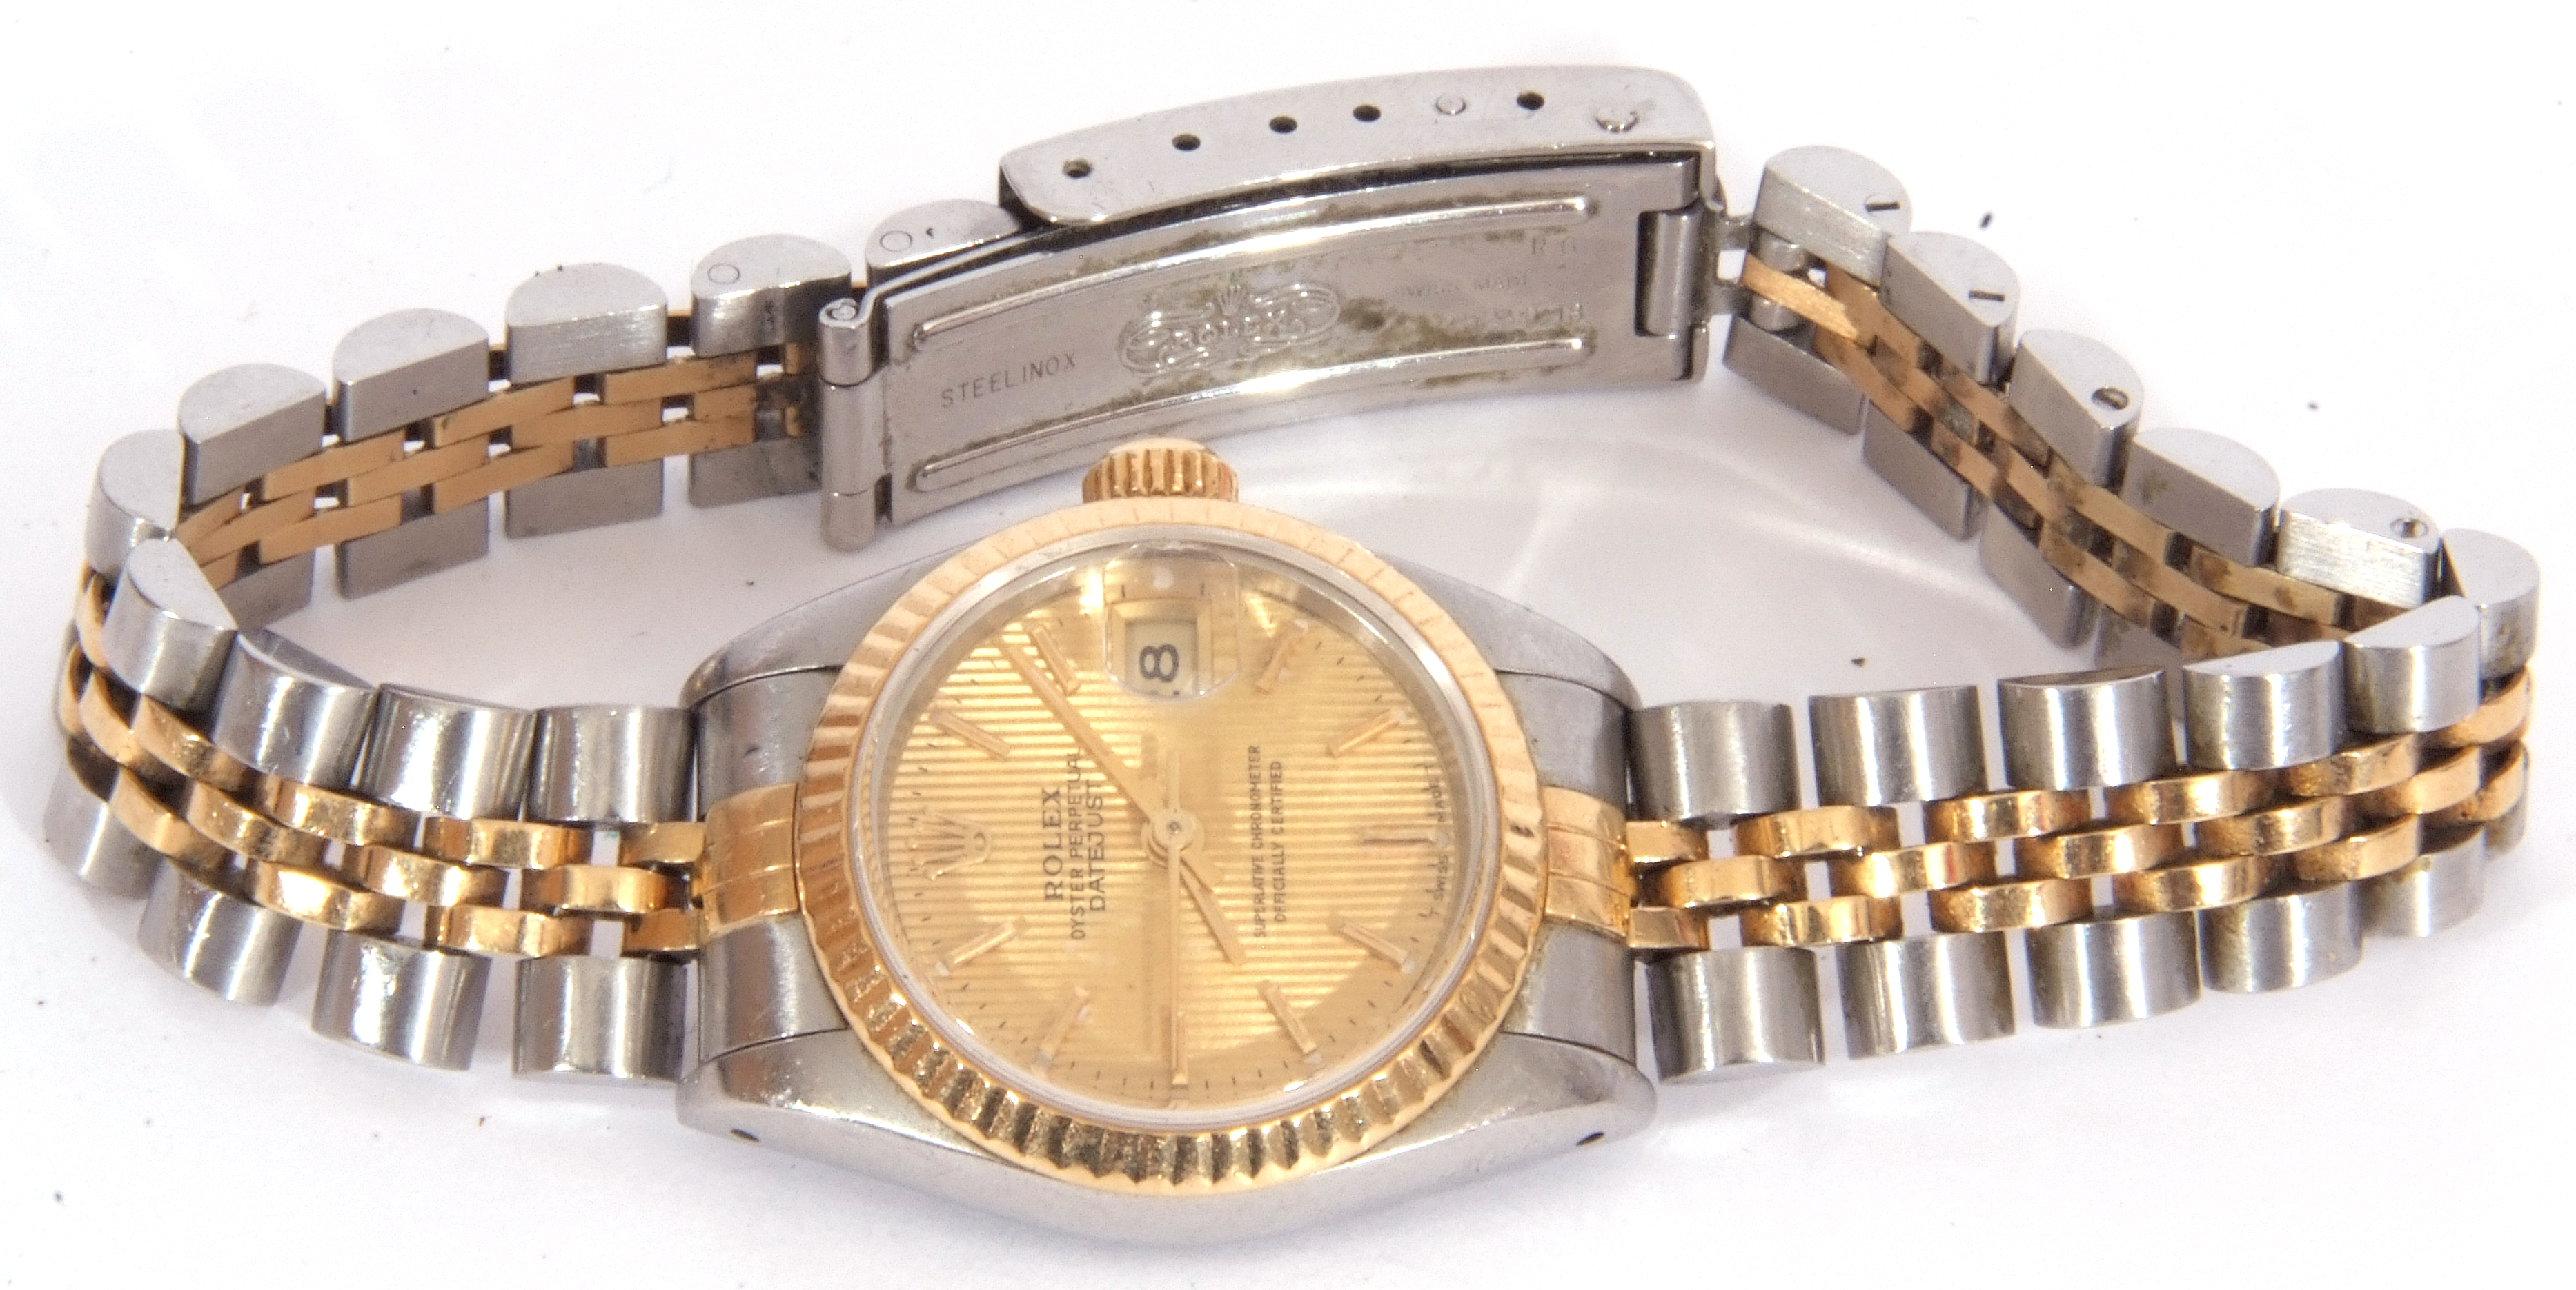 Ladies Rolex Oyster Perpetual Datejust, bi-metal fluted bezel watch with champagne dial, baton - Image 2 of 8